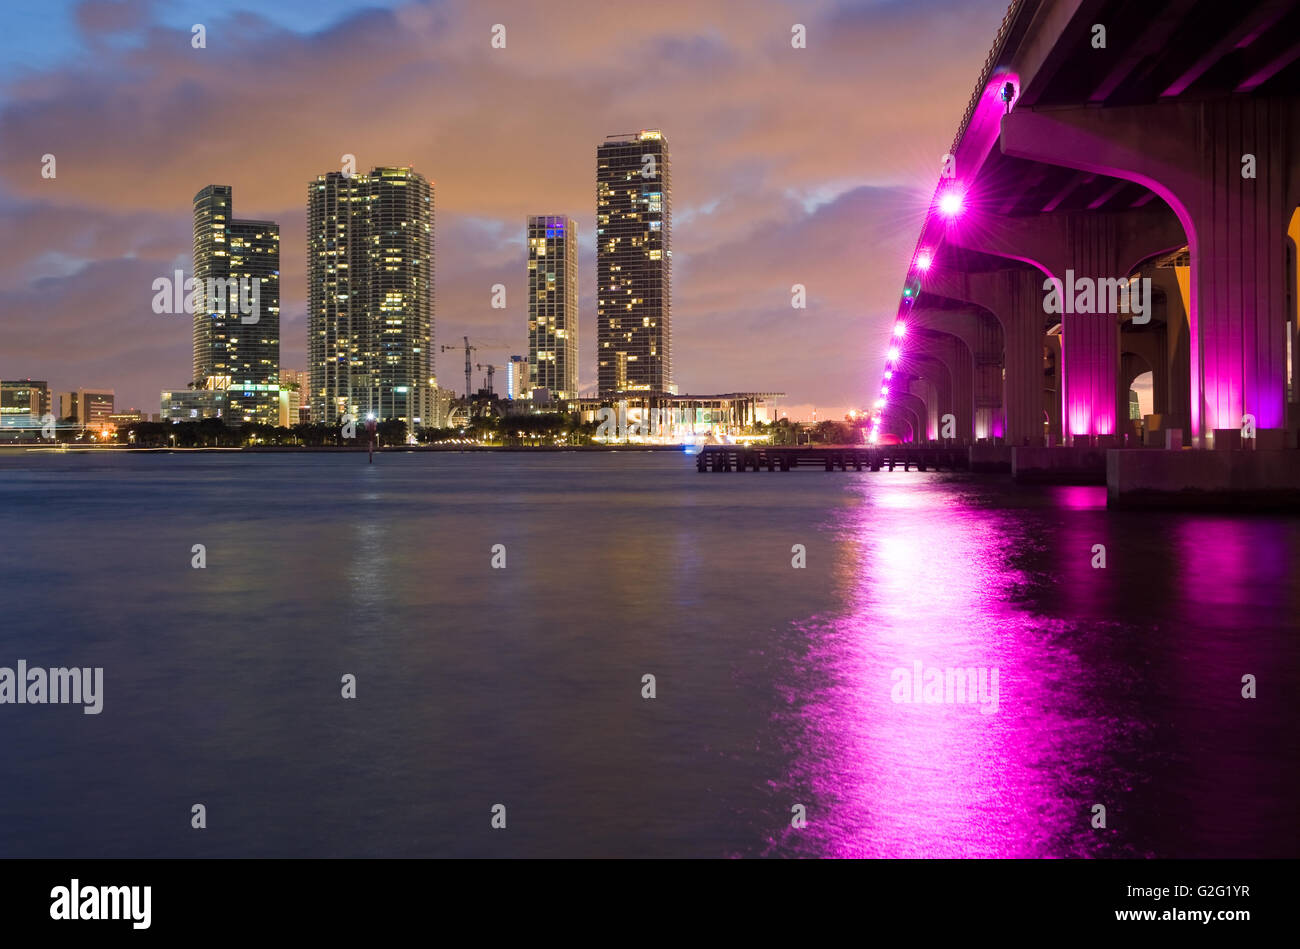 Skyline from Miami as seen from Watson Island Stock Photo